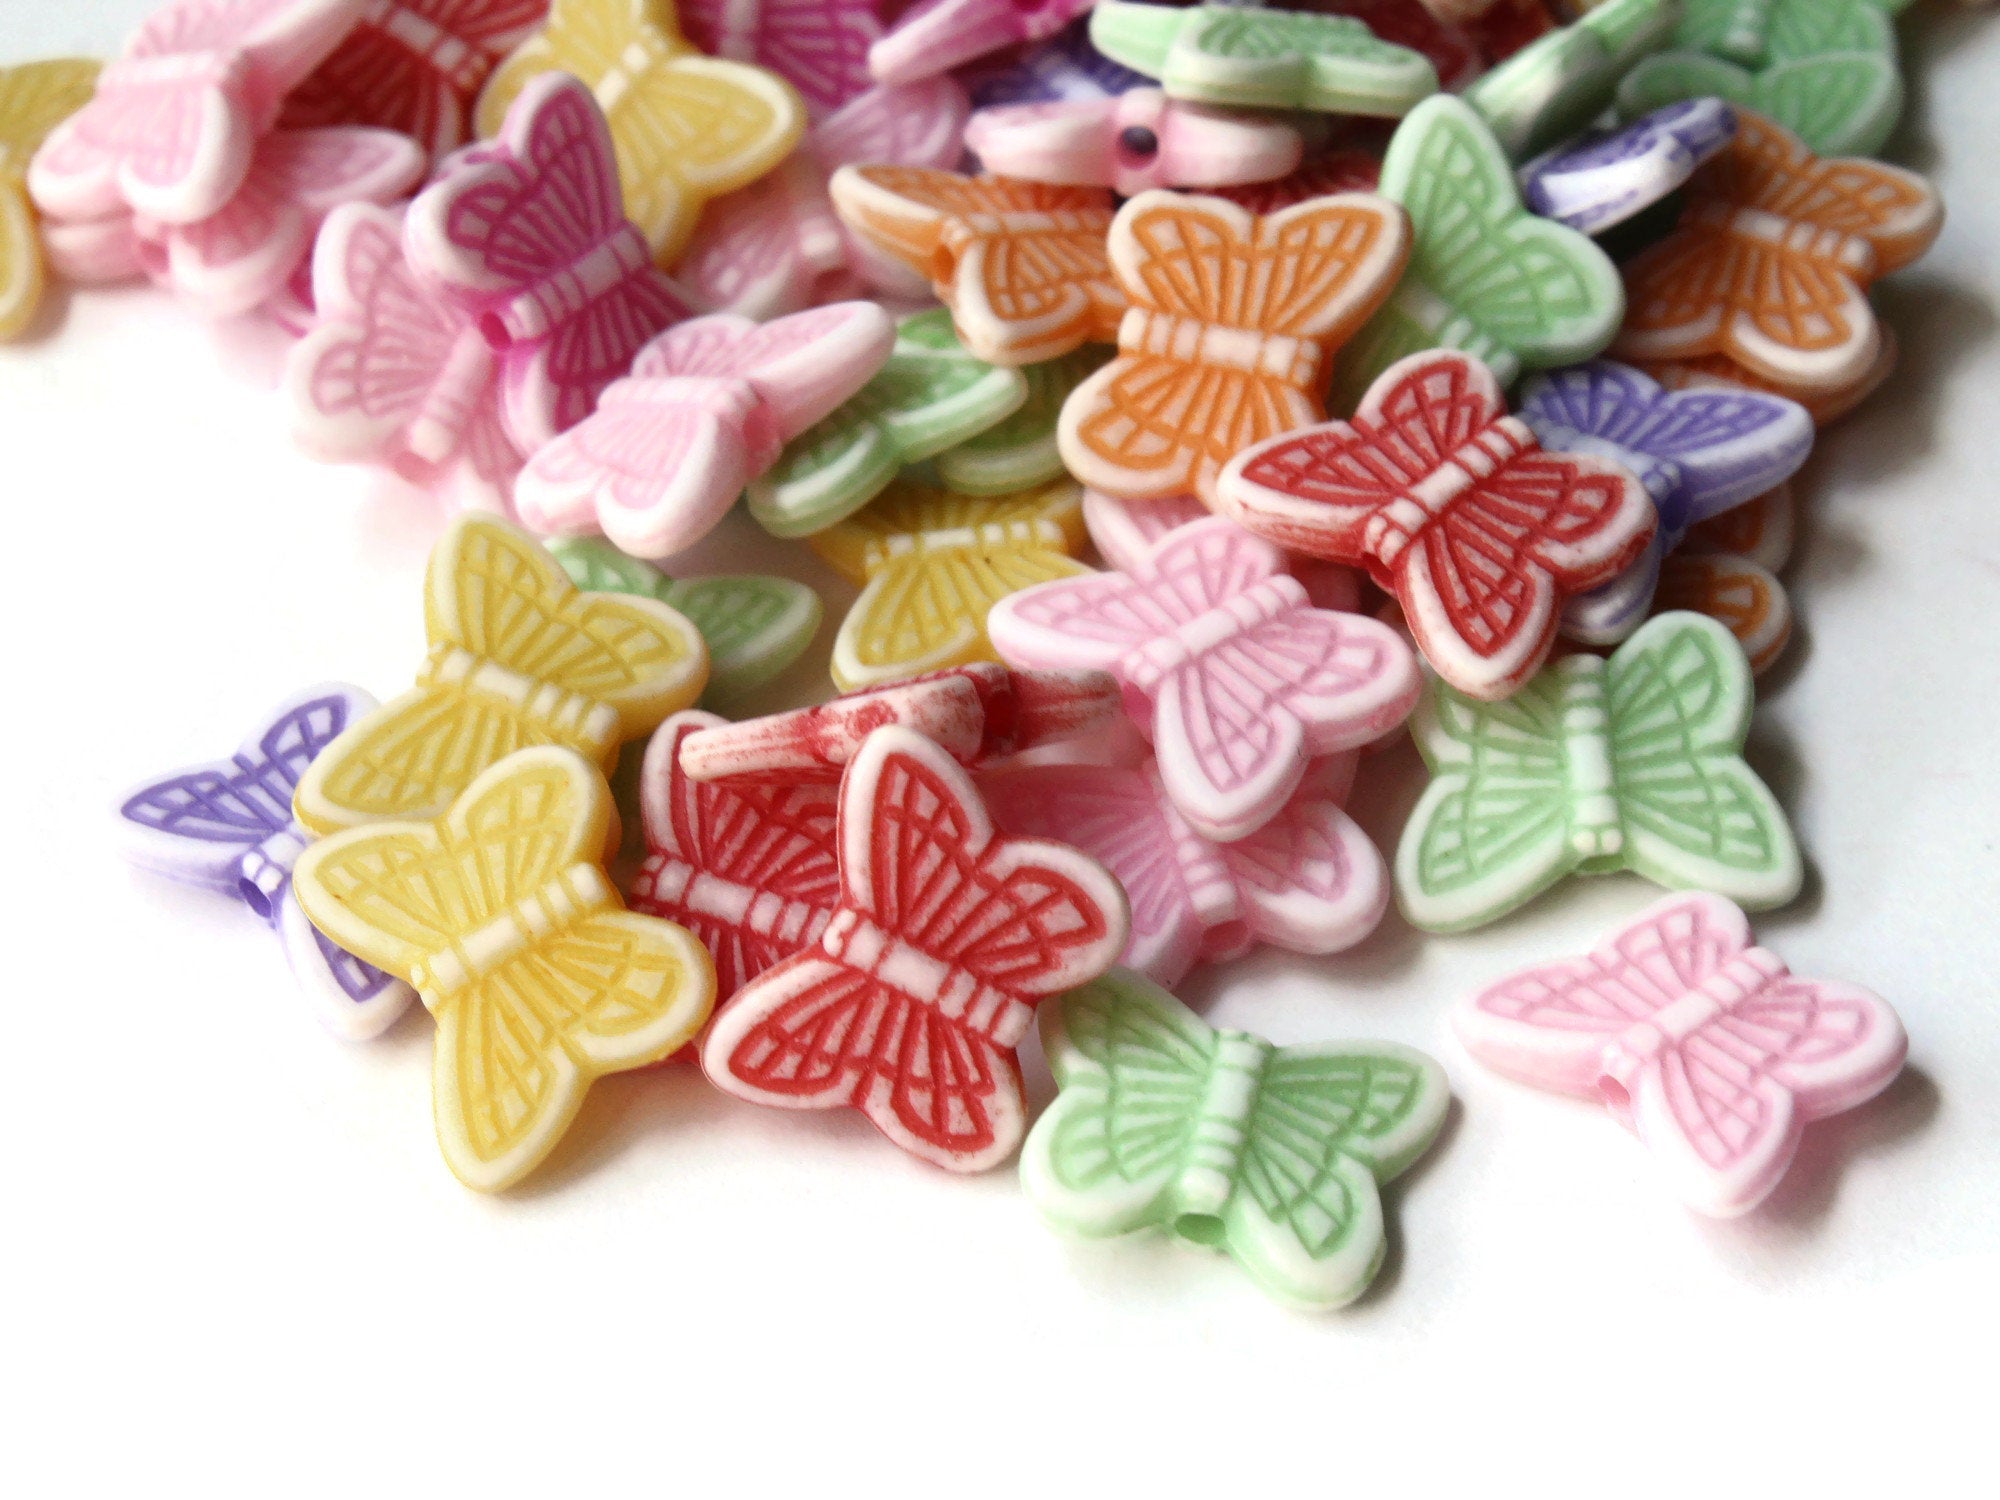 100 14mm Mixed Color Butterfly Beads Plastic Butterflies Loose Acrylic –  Smileyboy Beads